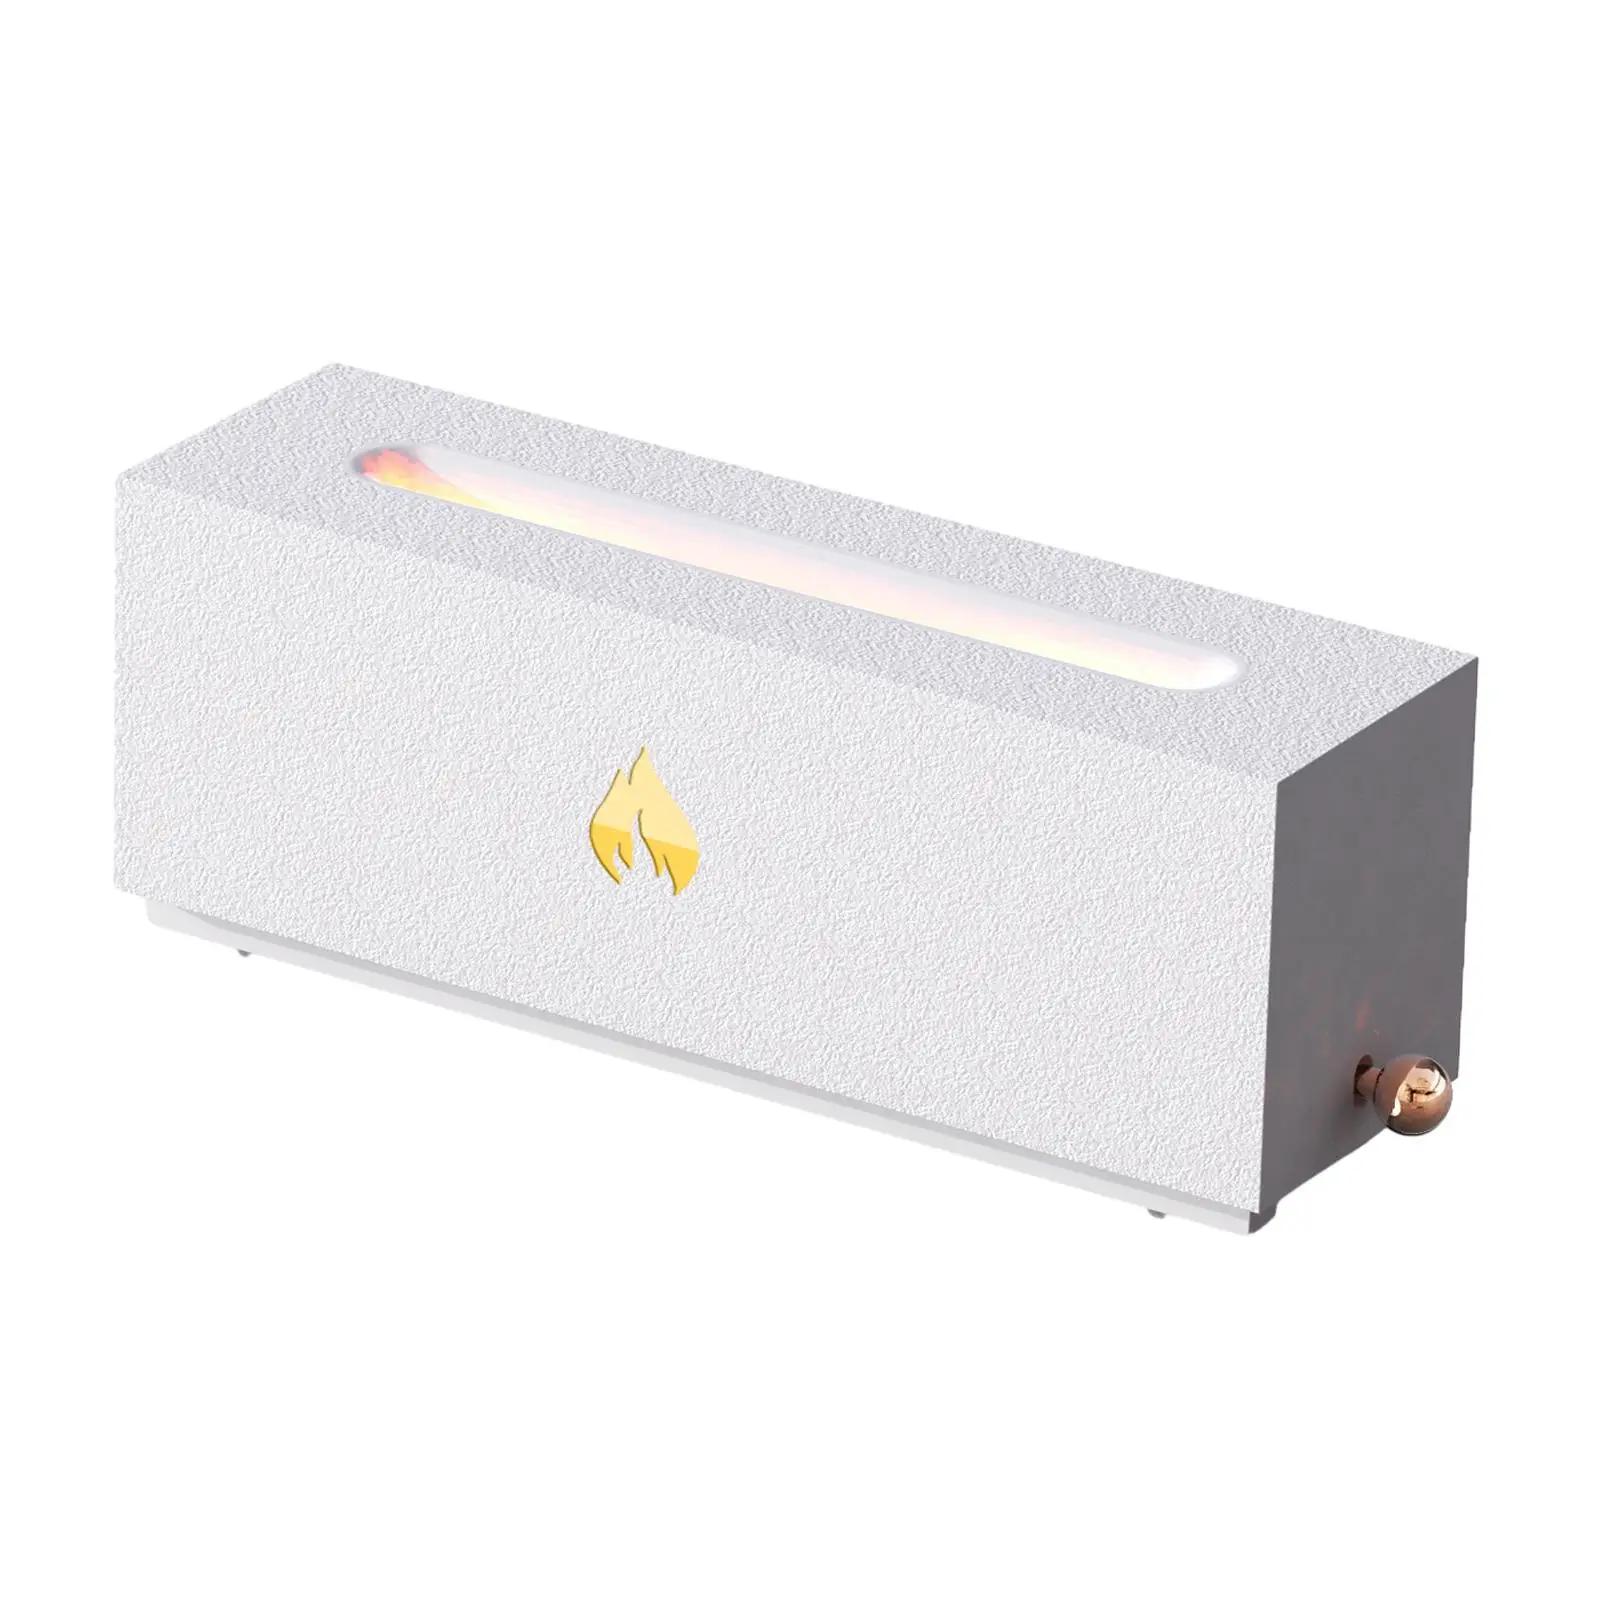 Flame Diffuser Quiet Fragrance Aroma Diffuser for Large Room Desktop Office